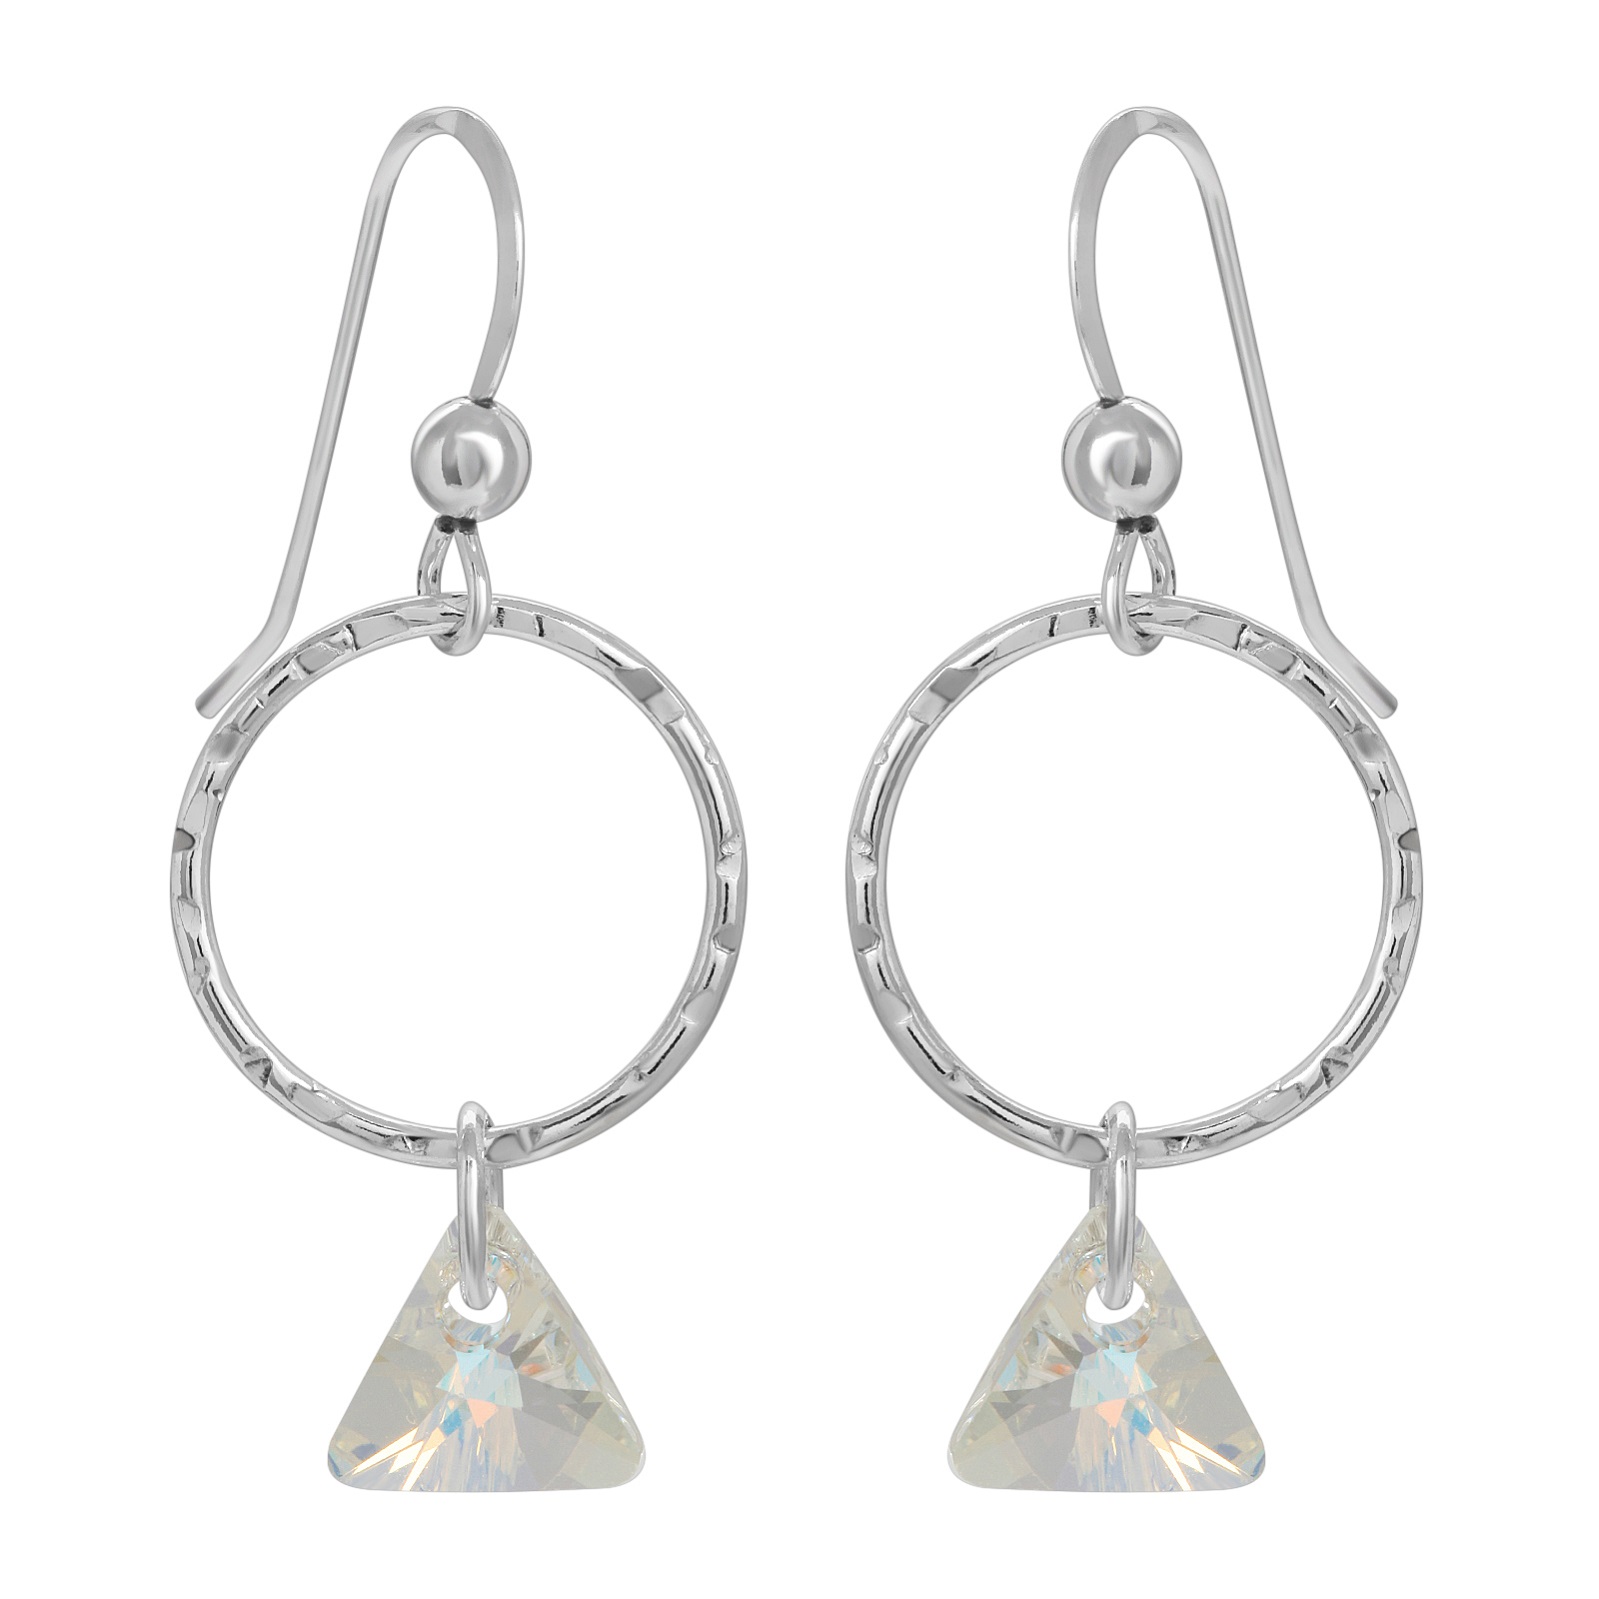 Hammered Hoop with Triangle Crystal Earrings - Clear AB